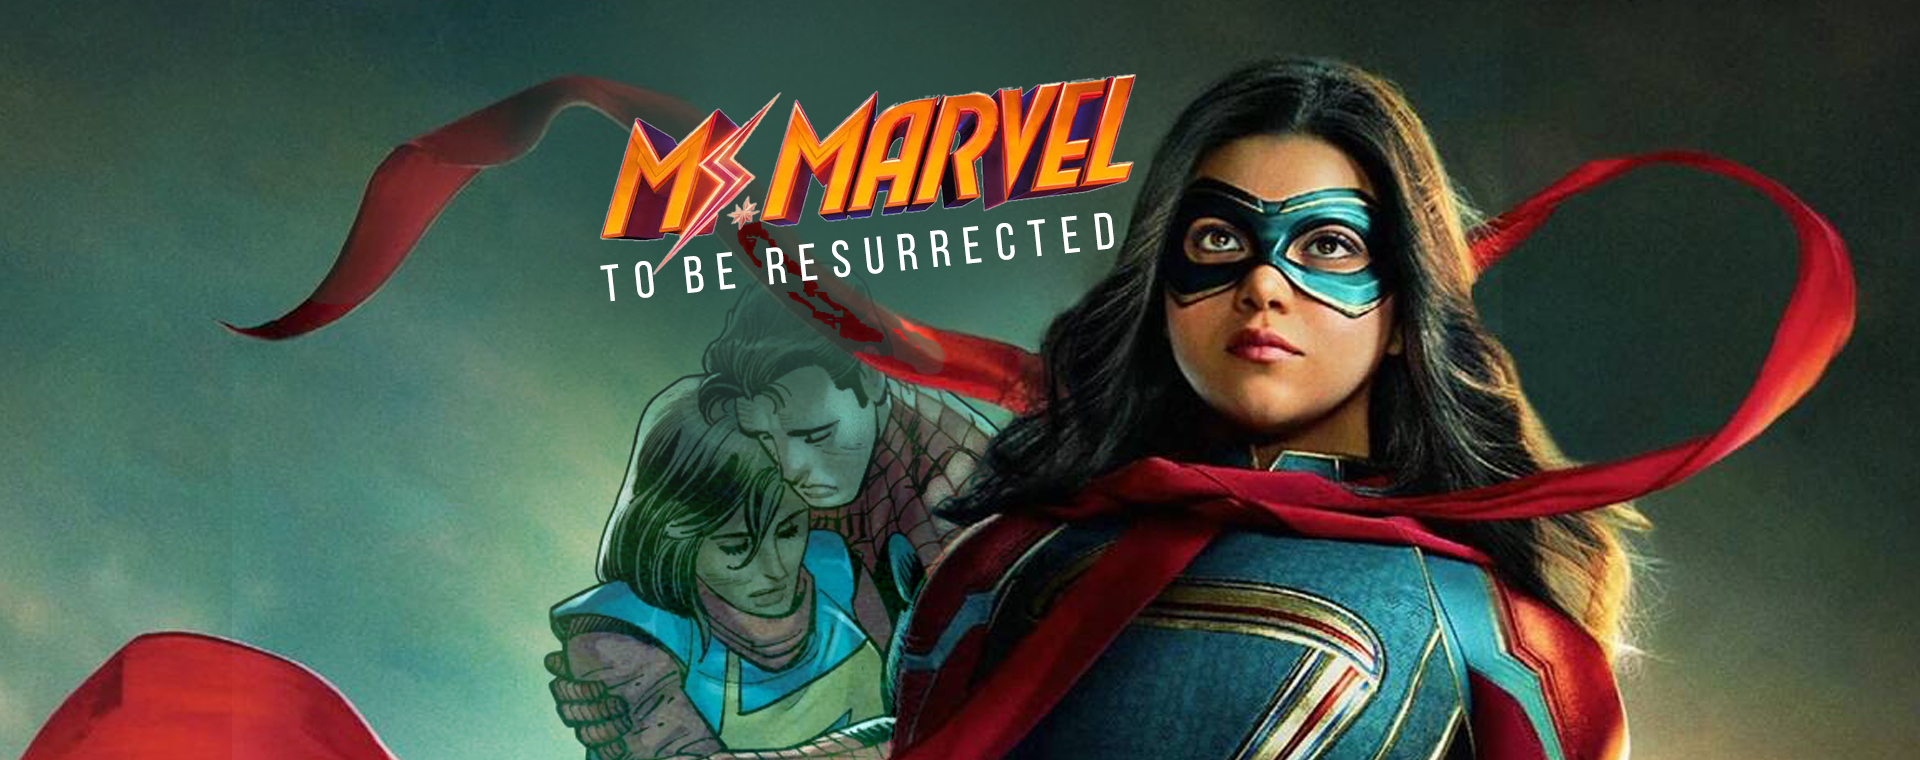 Ms Marvel To be Resurrected